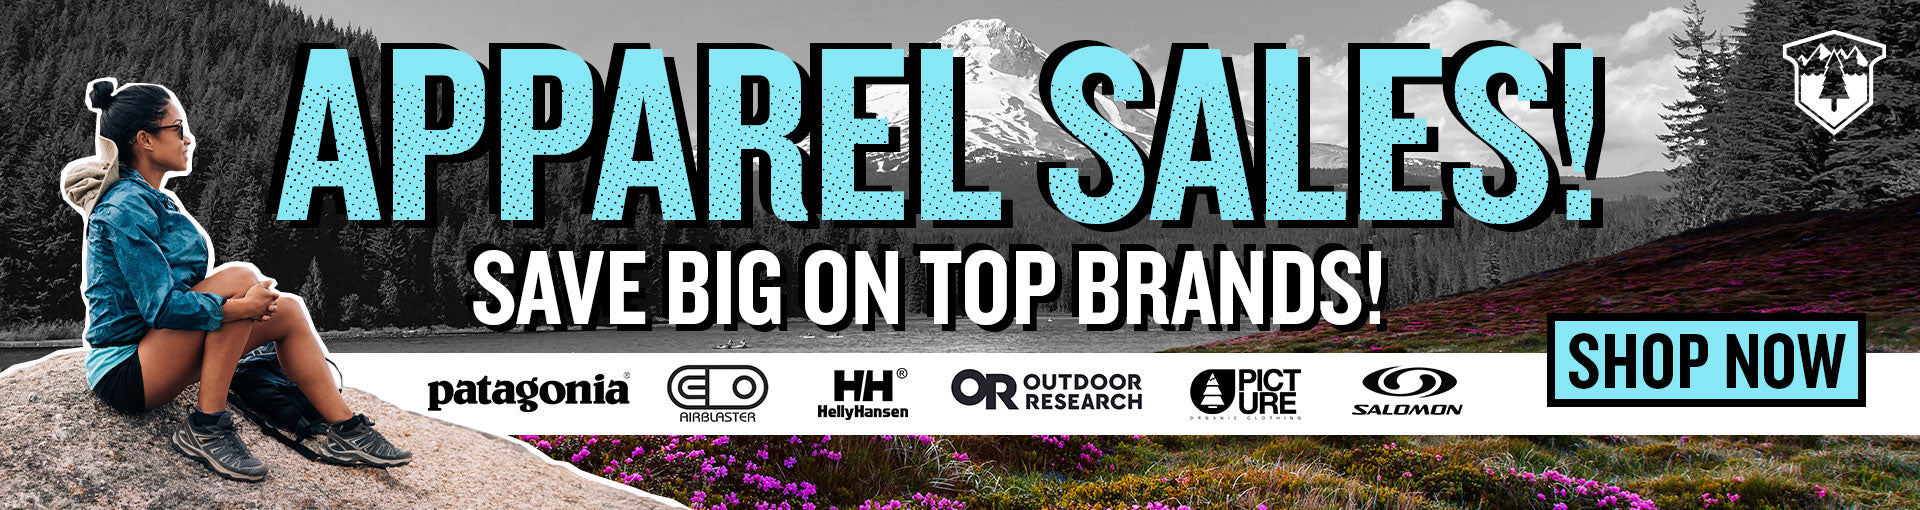 Deals on outdoor clothing, gear and more